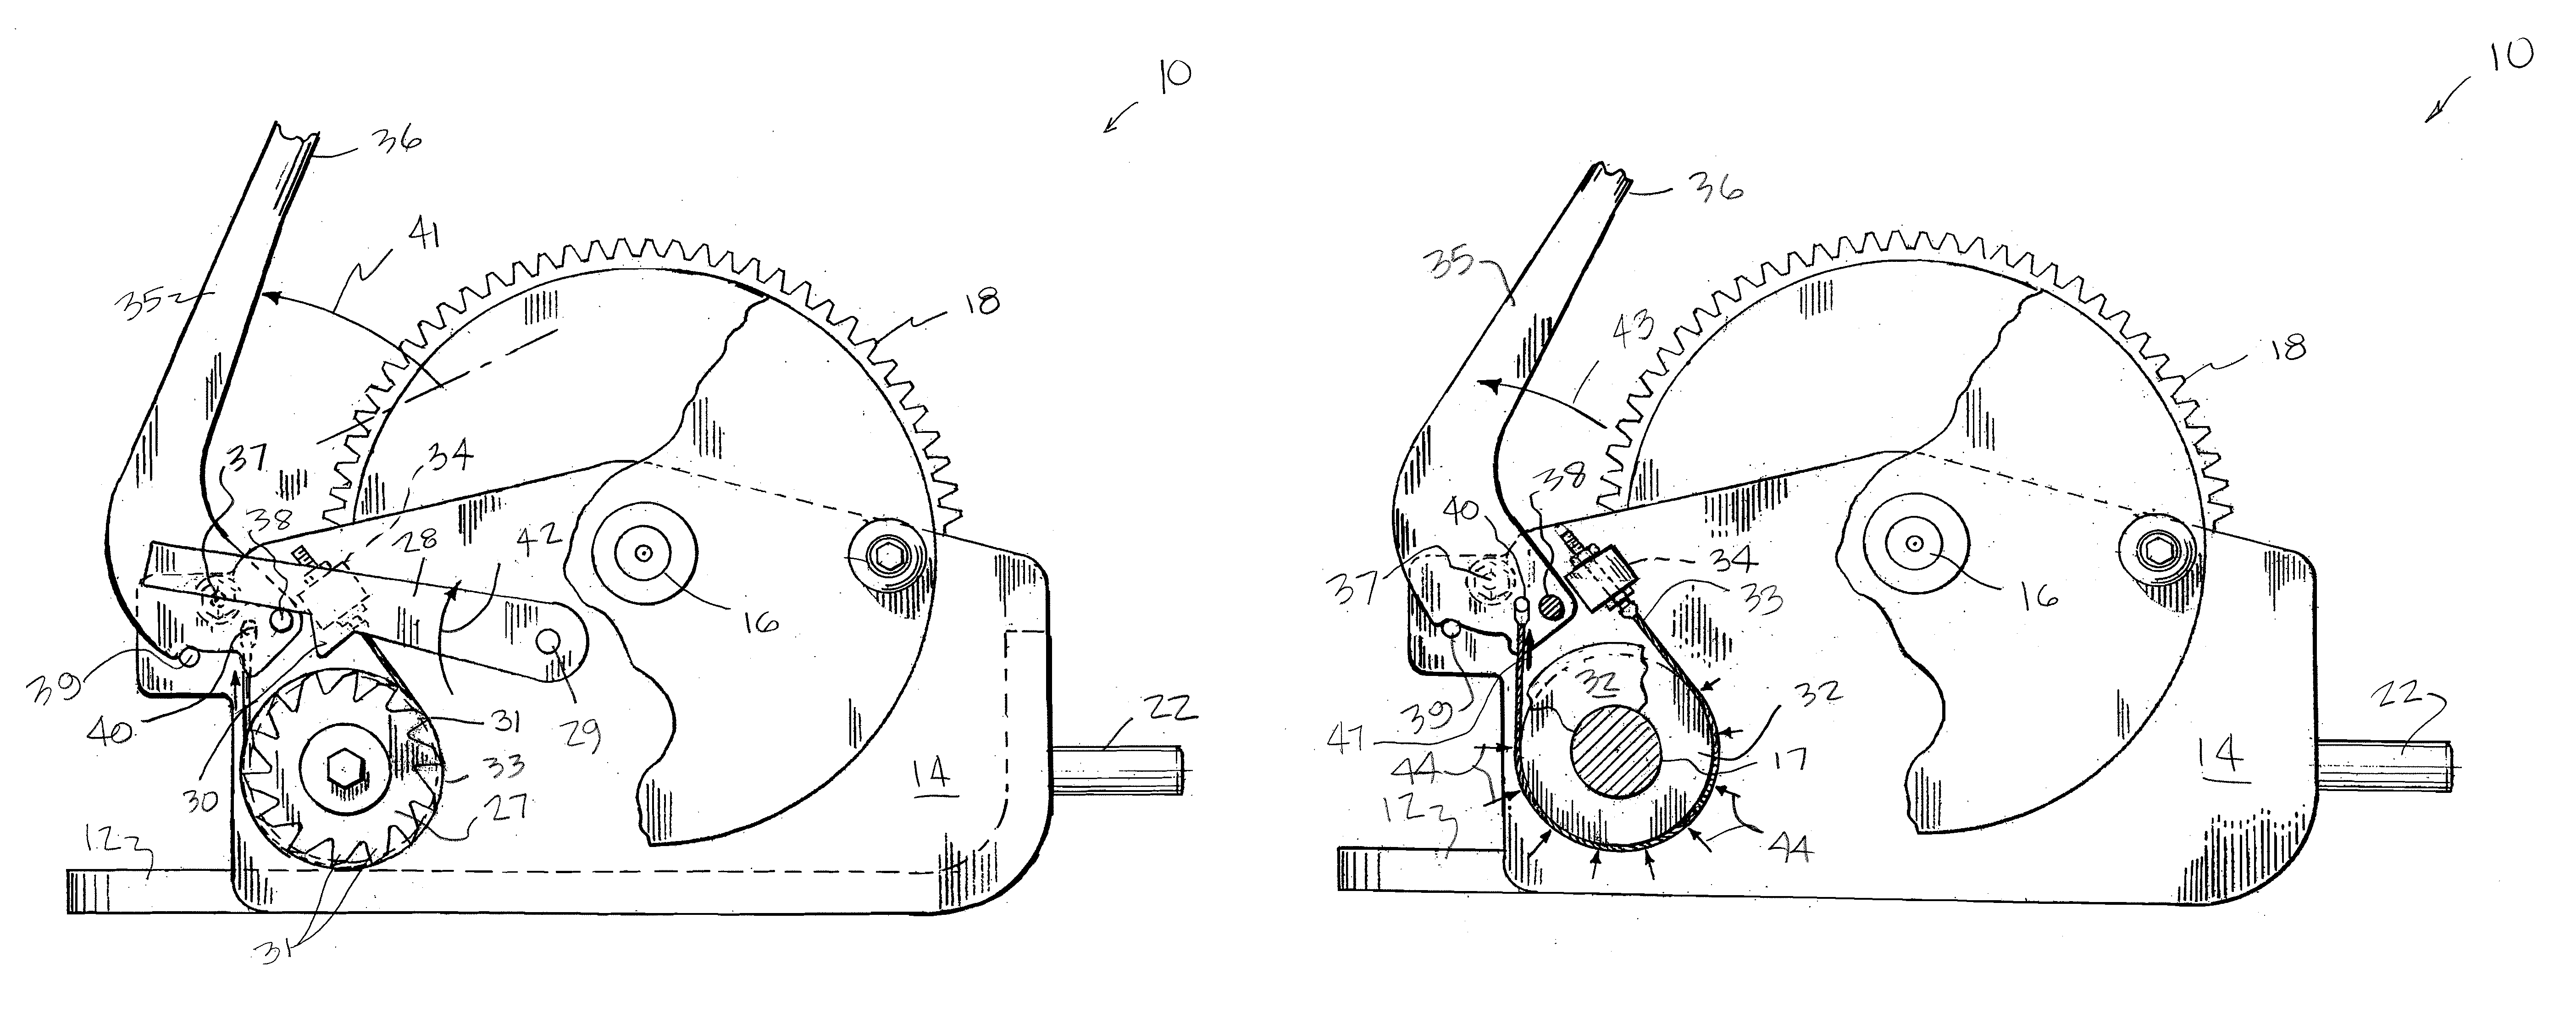 Handle-operated brake/release mechanism for a cable drum winch